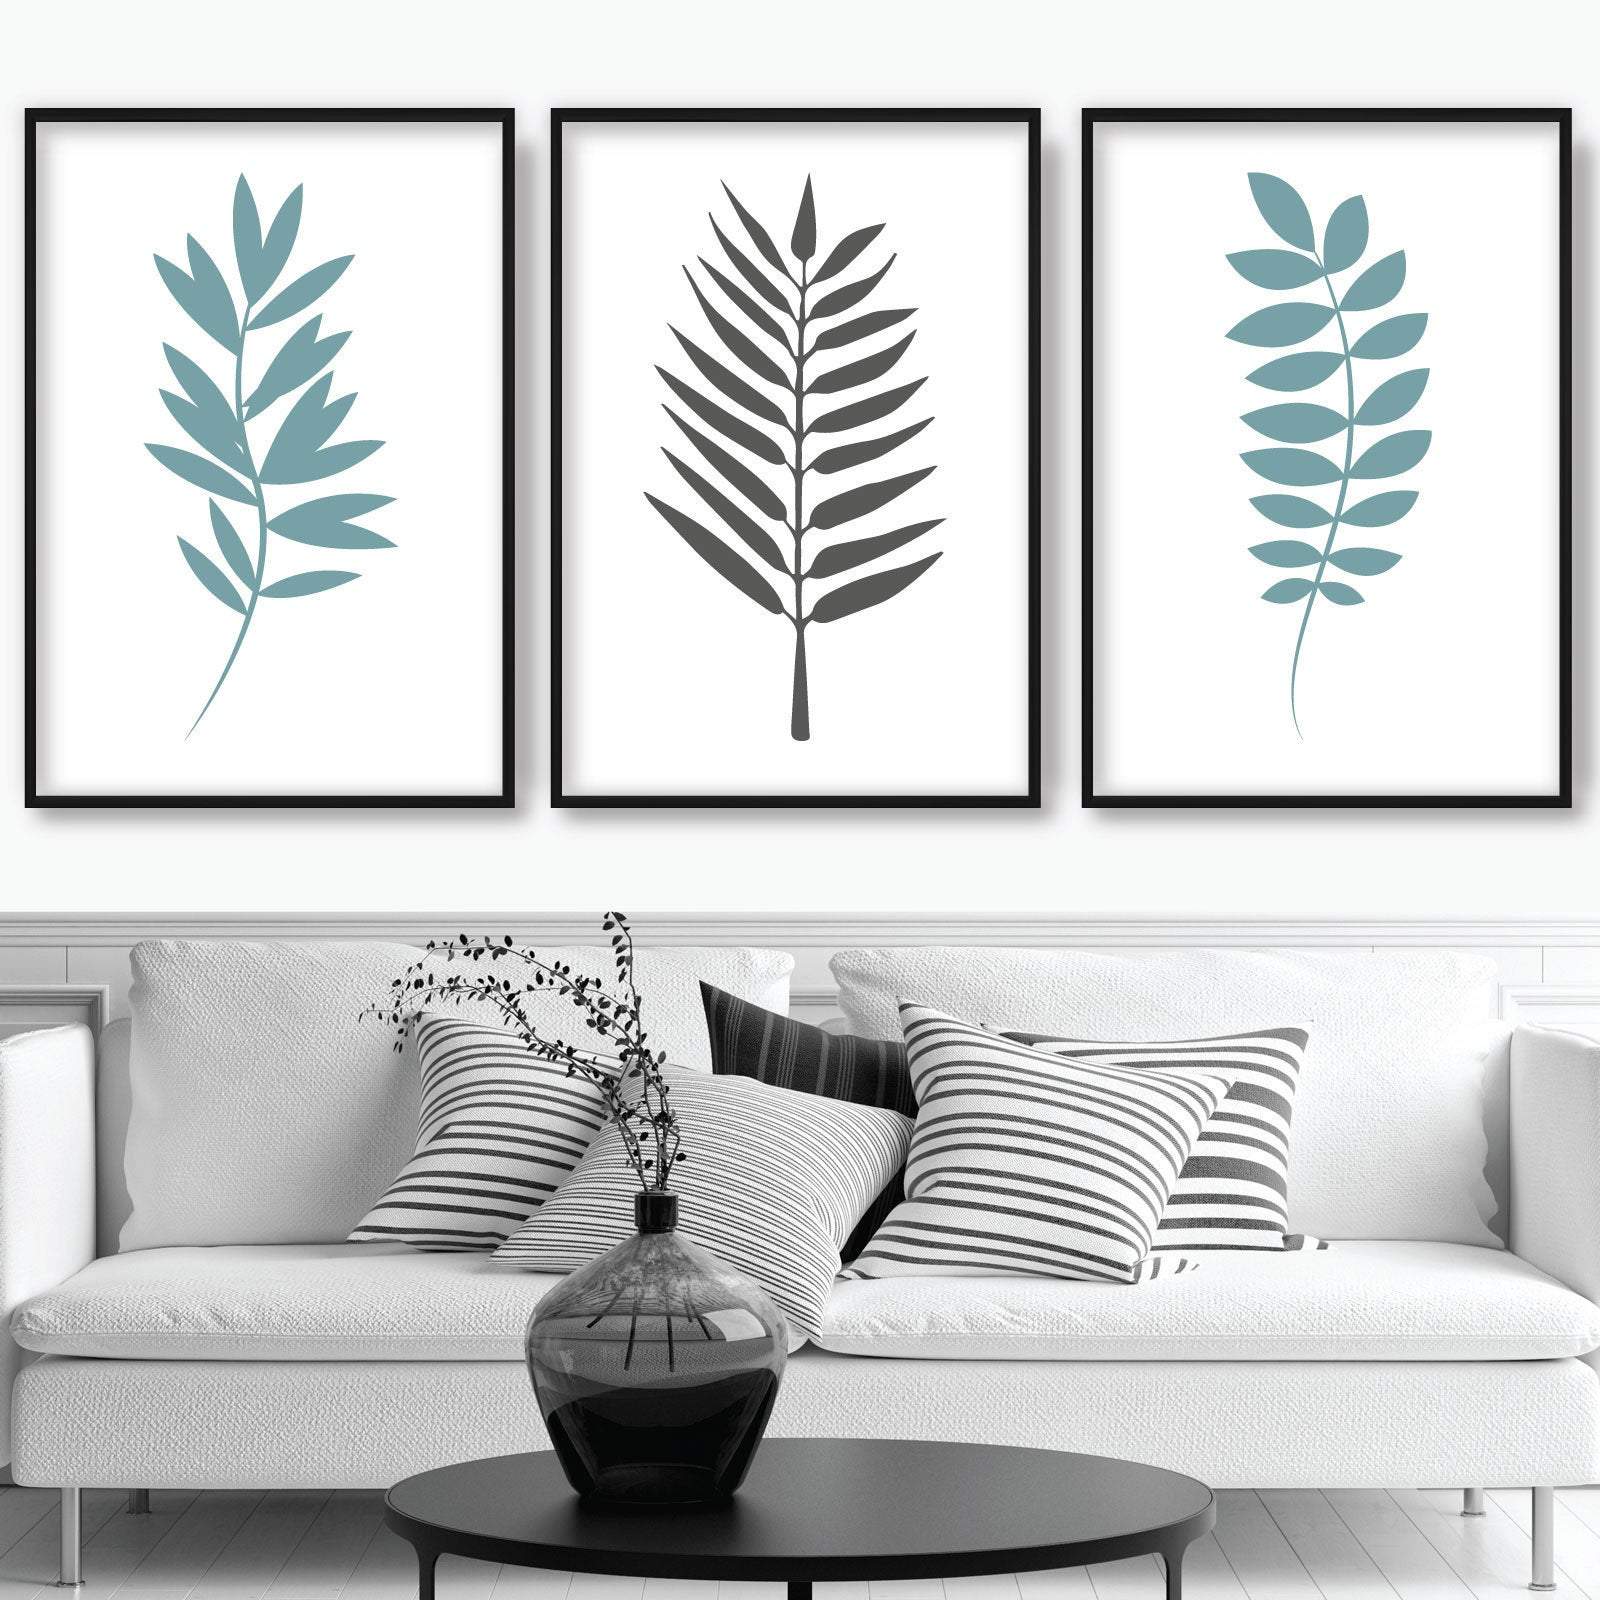 Set of 3 Duck Egg Blue and Grey Gallery Wall Art Prints Tropical FERN